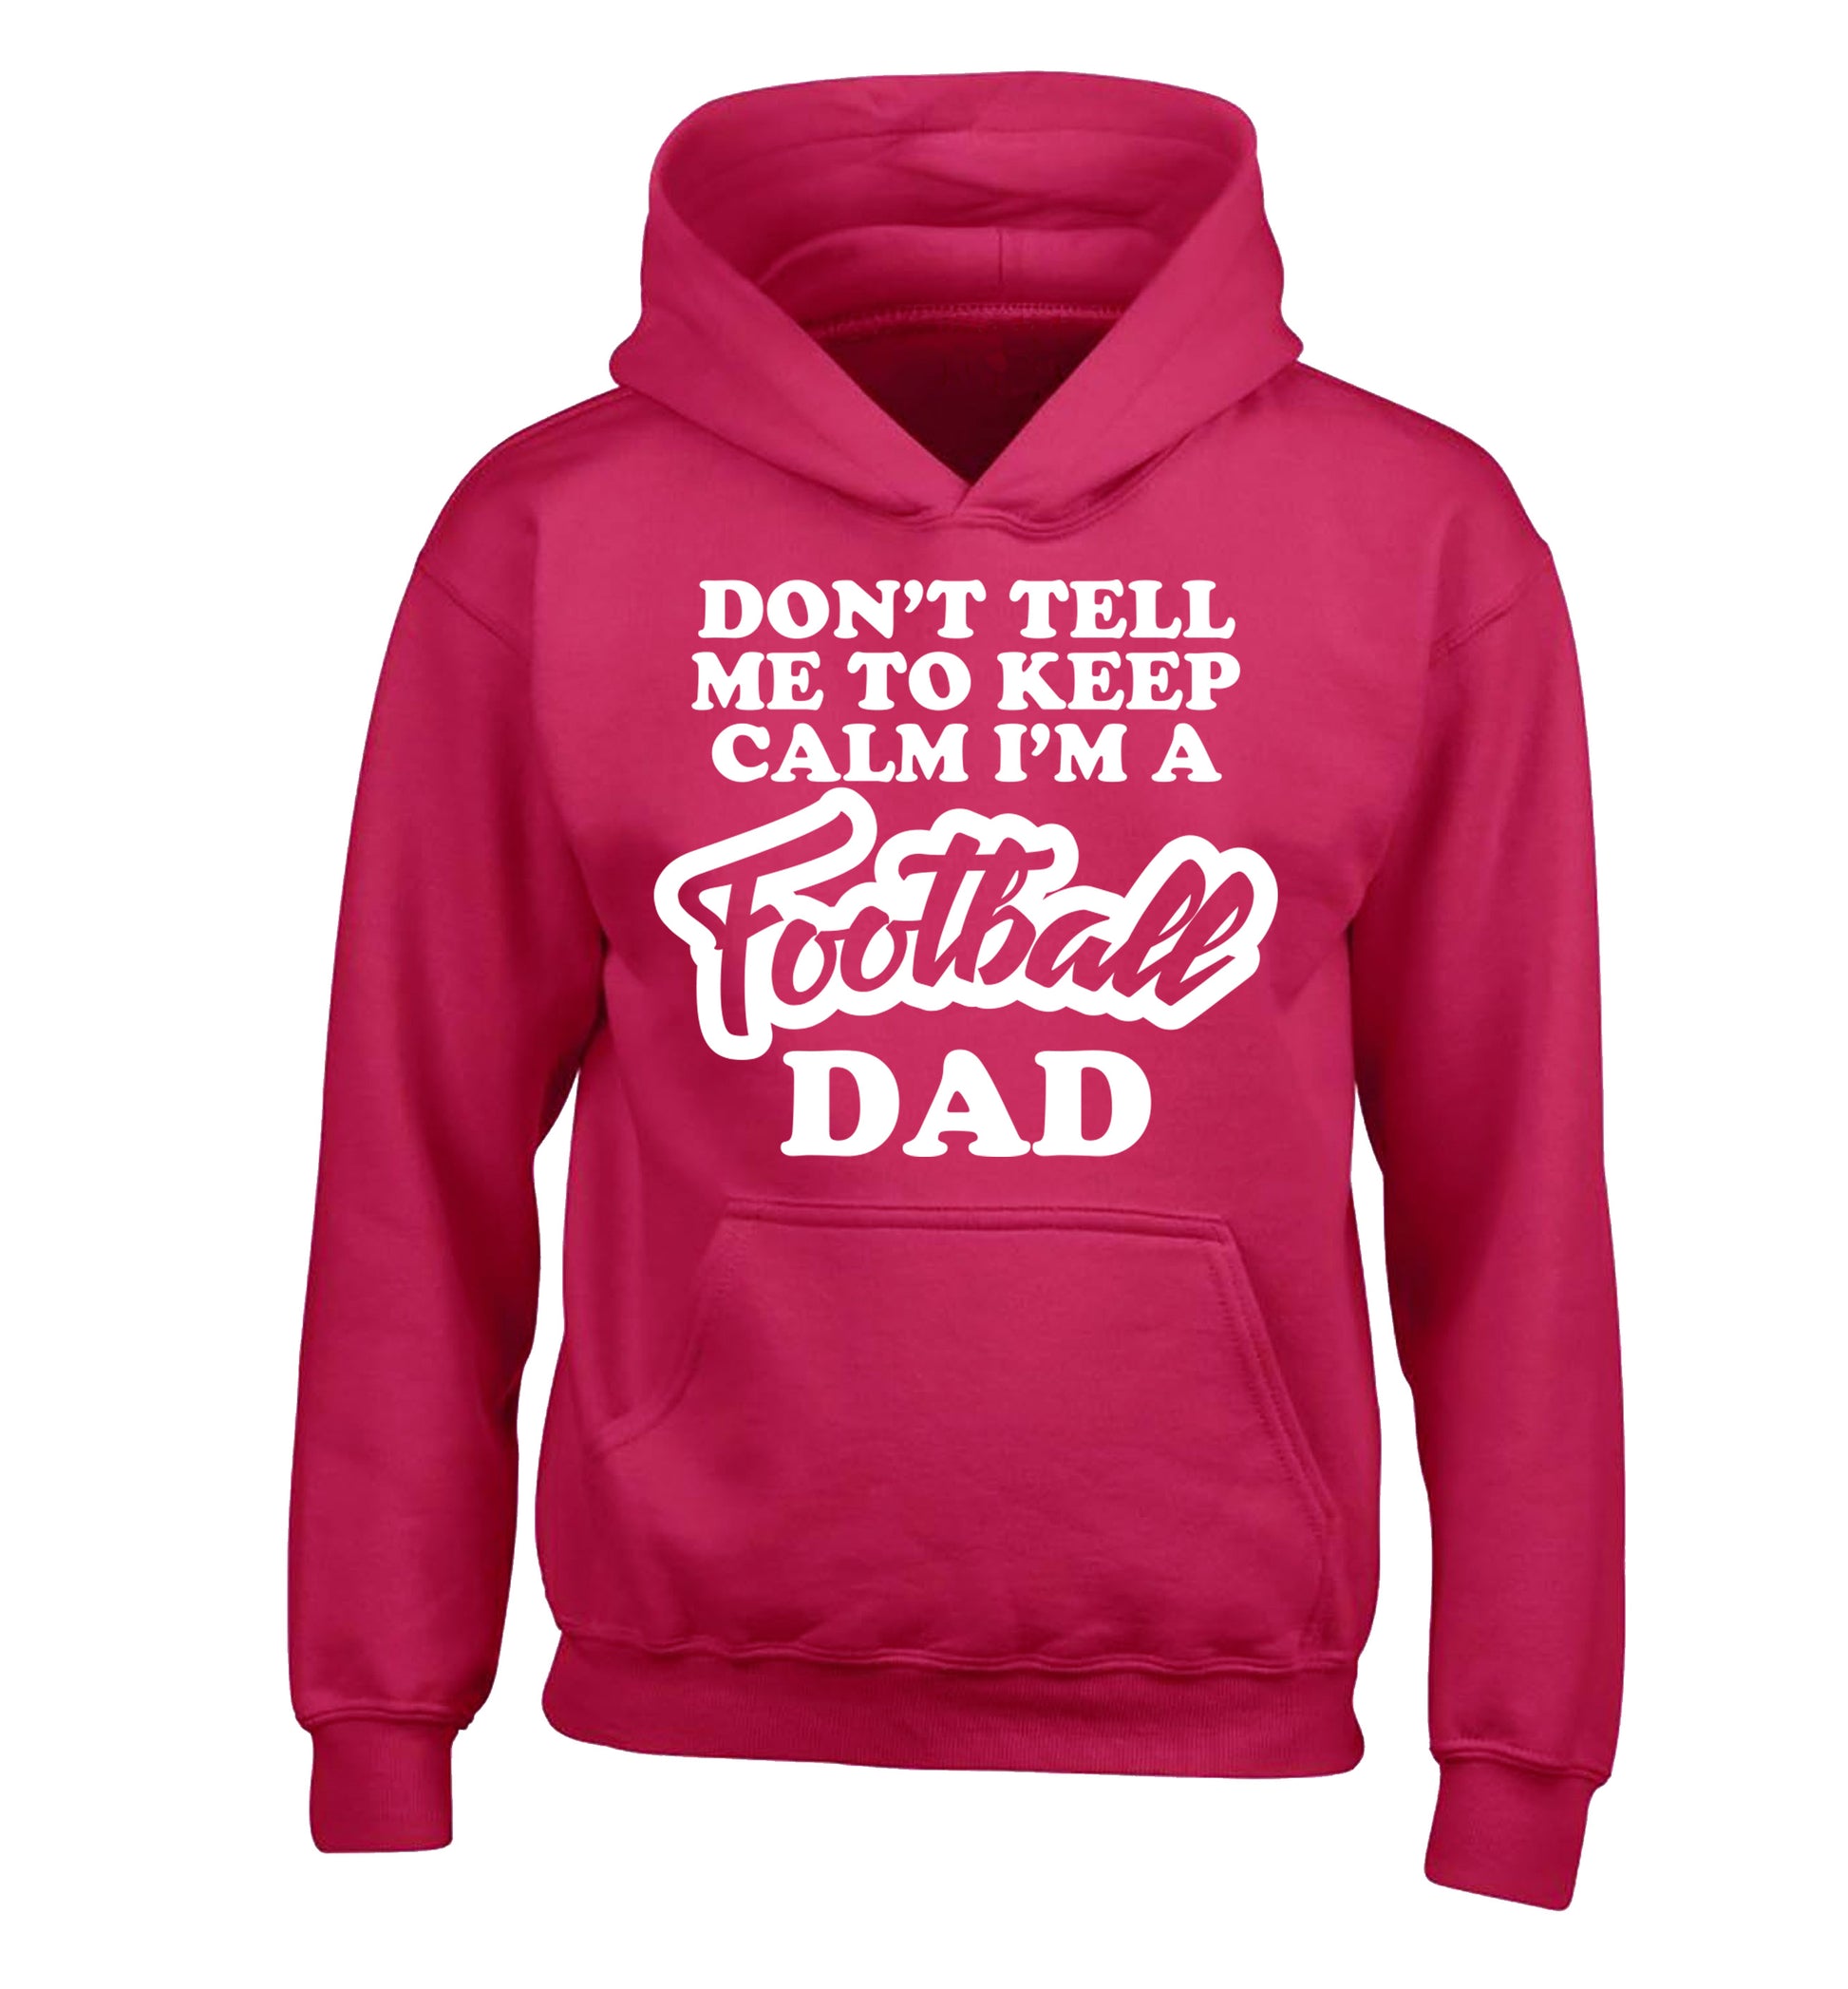 Don't tell me to keep calm I'm a football dad children's pink hoodie 12-14 Years